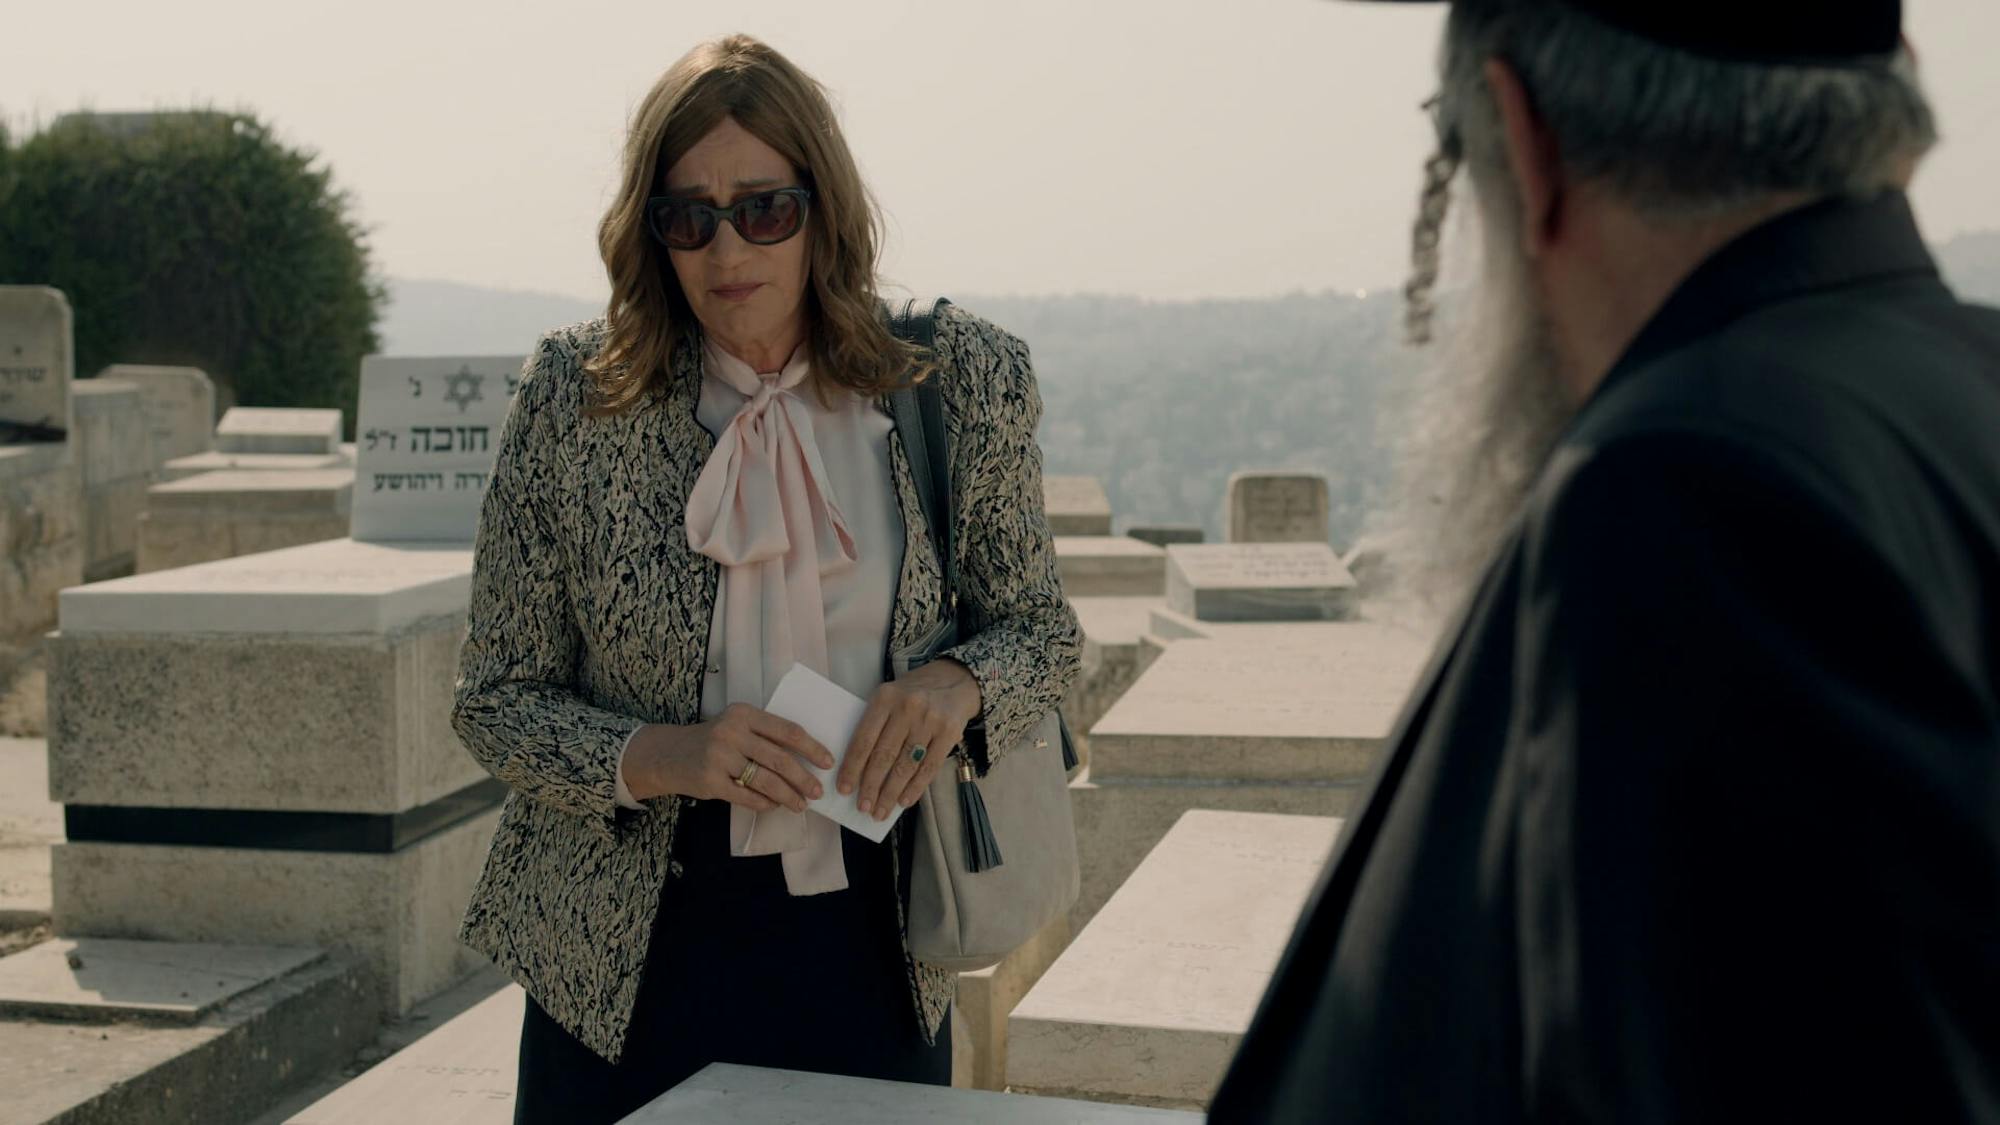 Nechama Yoktan and Shulem Shtisel stand in a cemetery. Nechama Yoktan looks upset even behind her large shades. She also wears a white shirt, pink scarf, and textured blazer. Shulem is in all black, and stands with his back to the viewer. The grim setting of the graveyard is offset by the bright sunlight and views behind them.